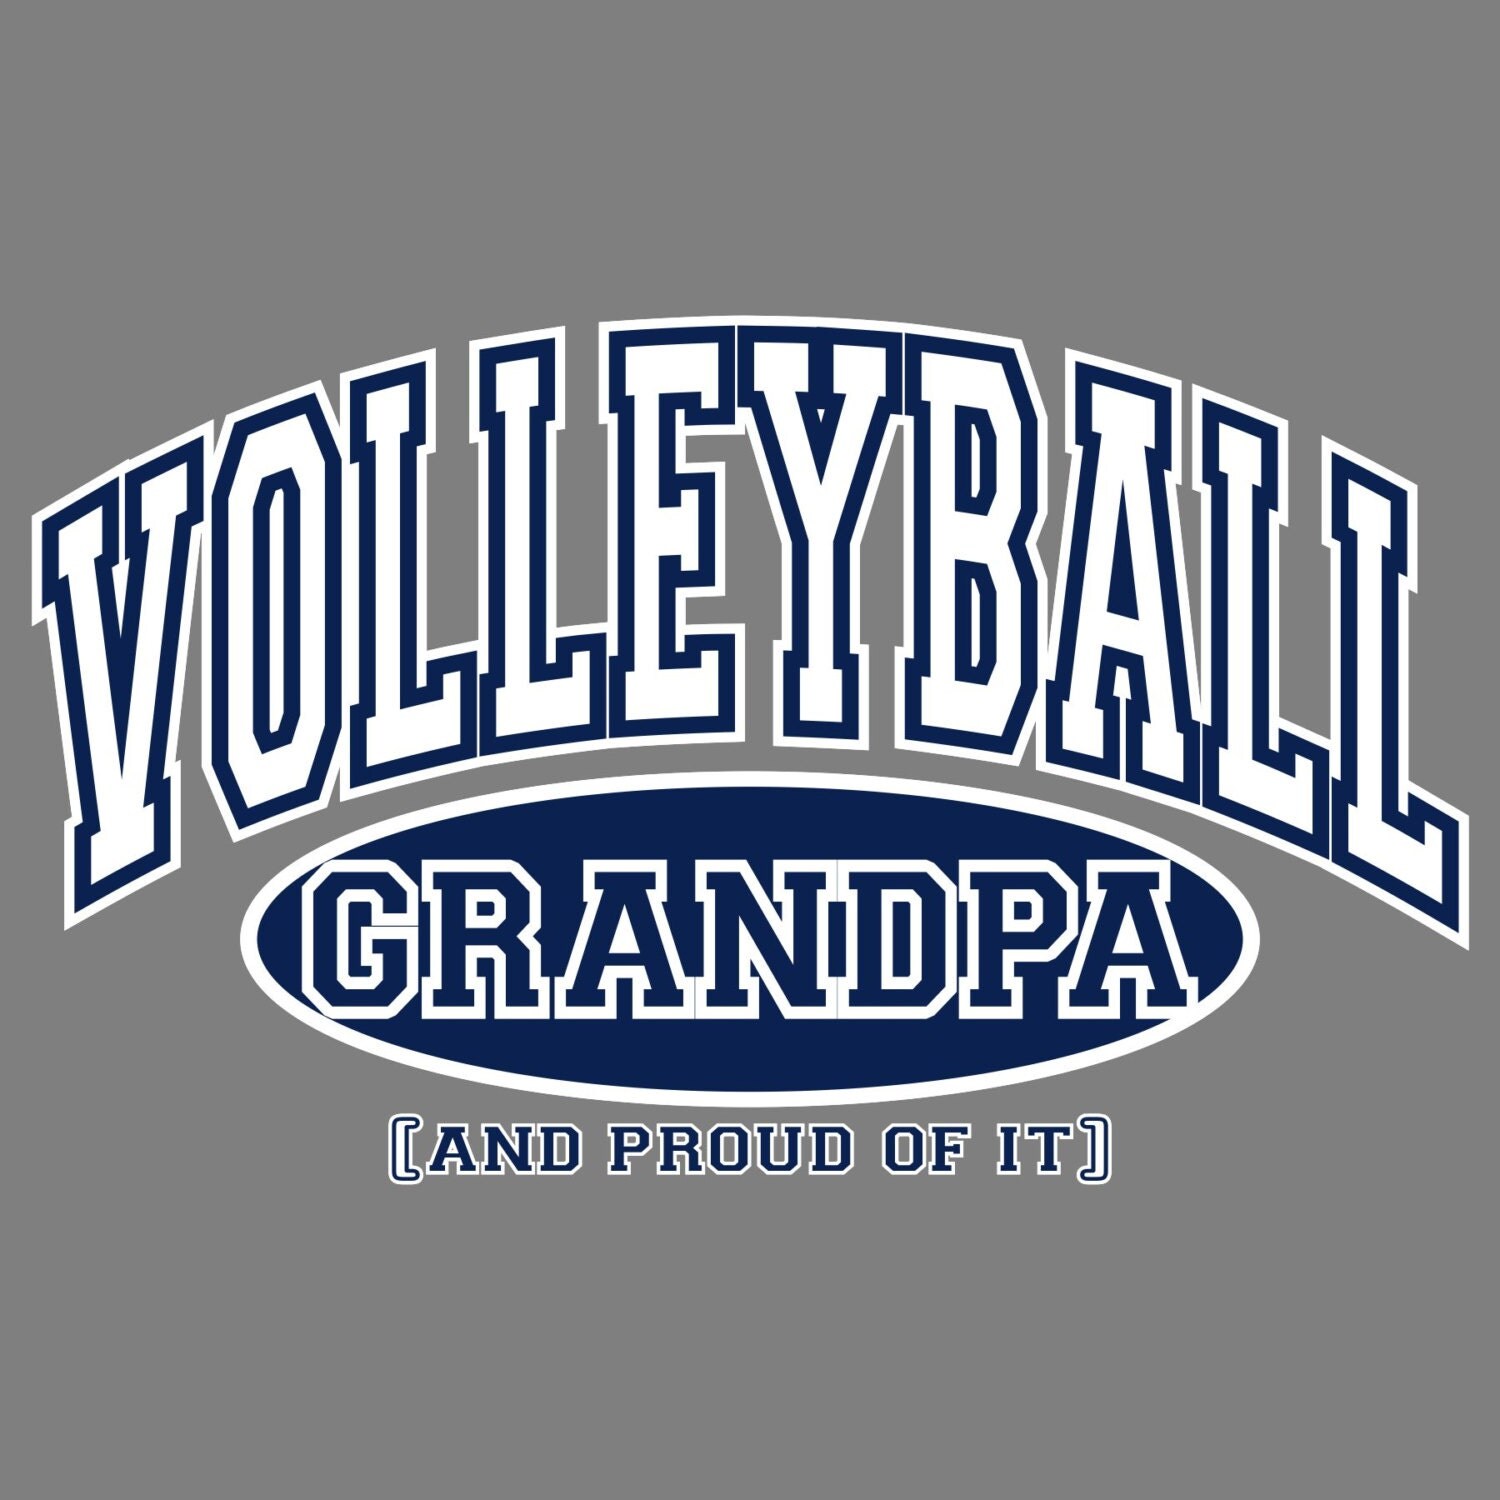 Download Volleyball Grandpa...and proud of it 100% Cotton T-Shirt